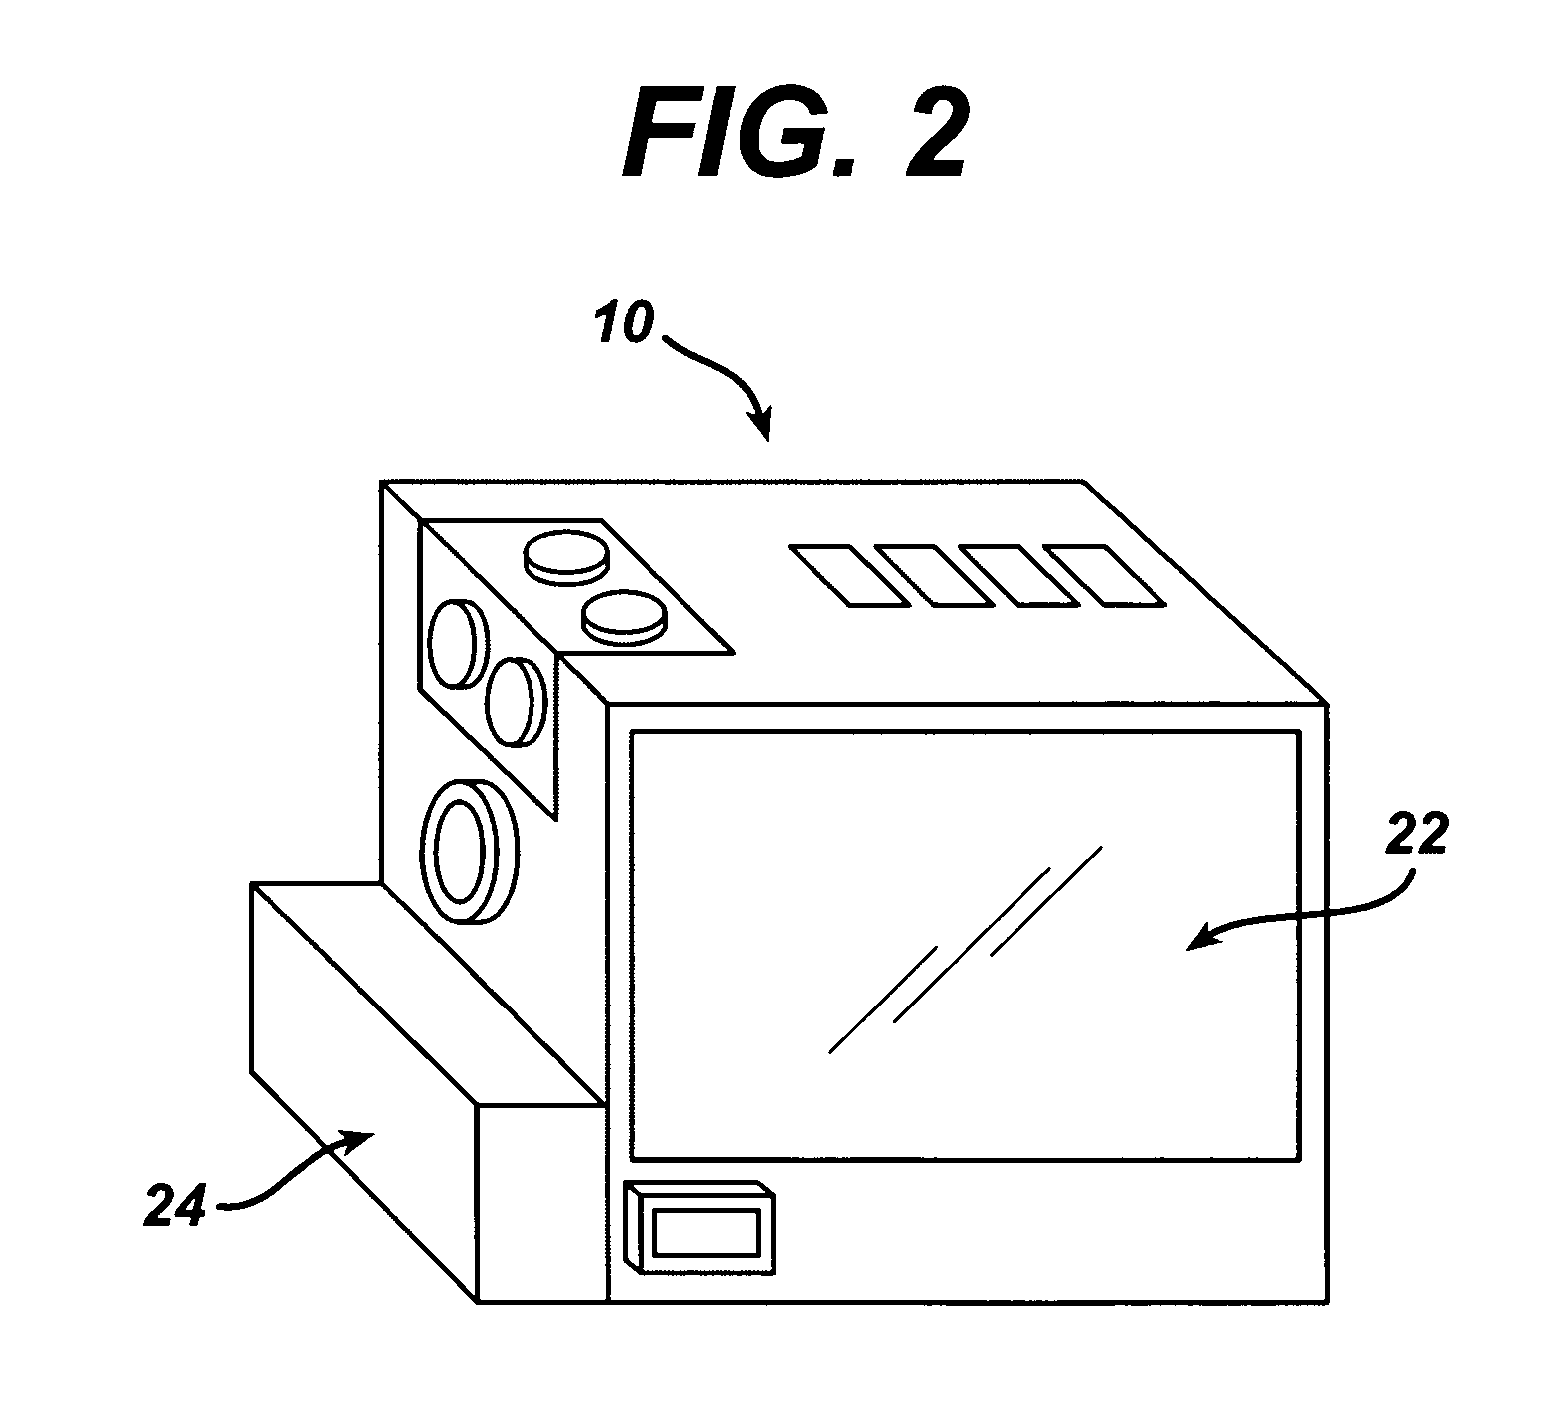 Patient monitoring and drug delivery system and method of use